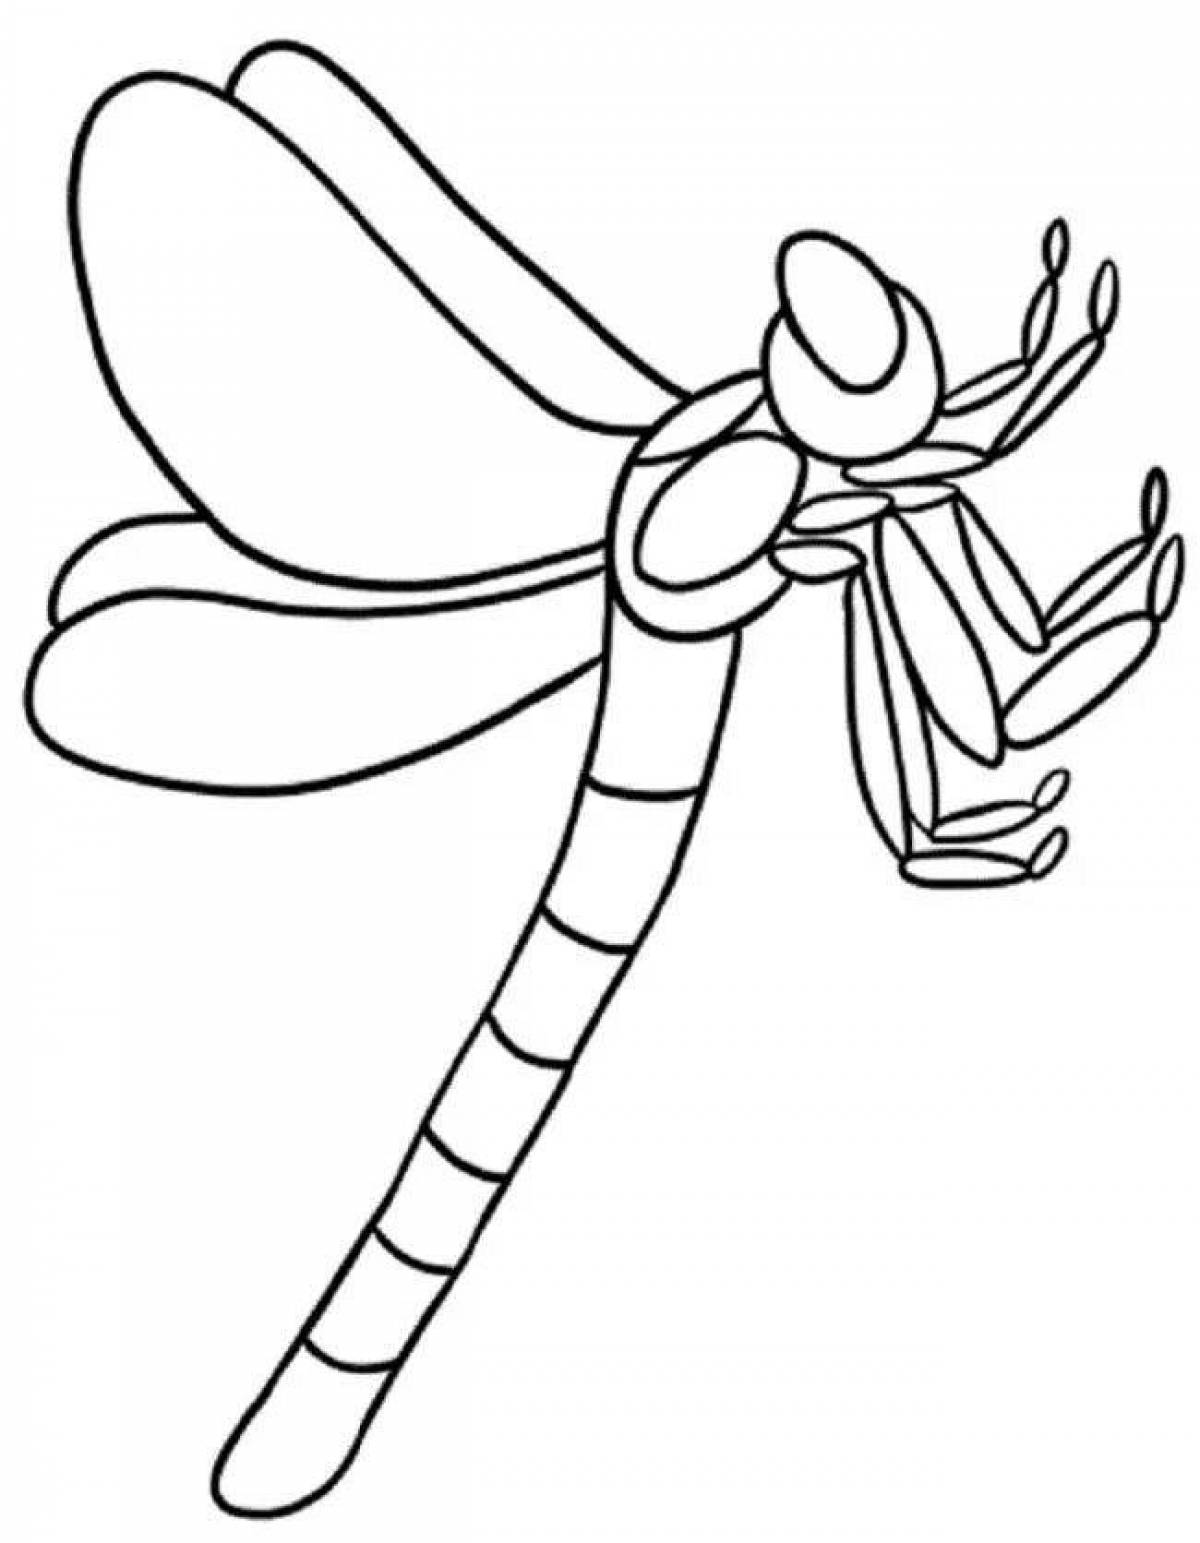 Dragonfly for kids #3